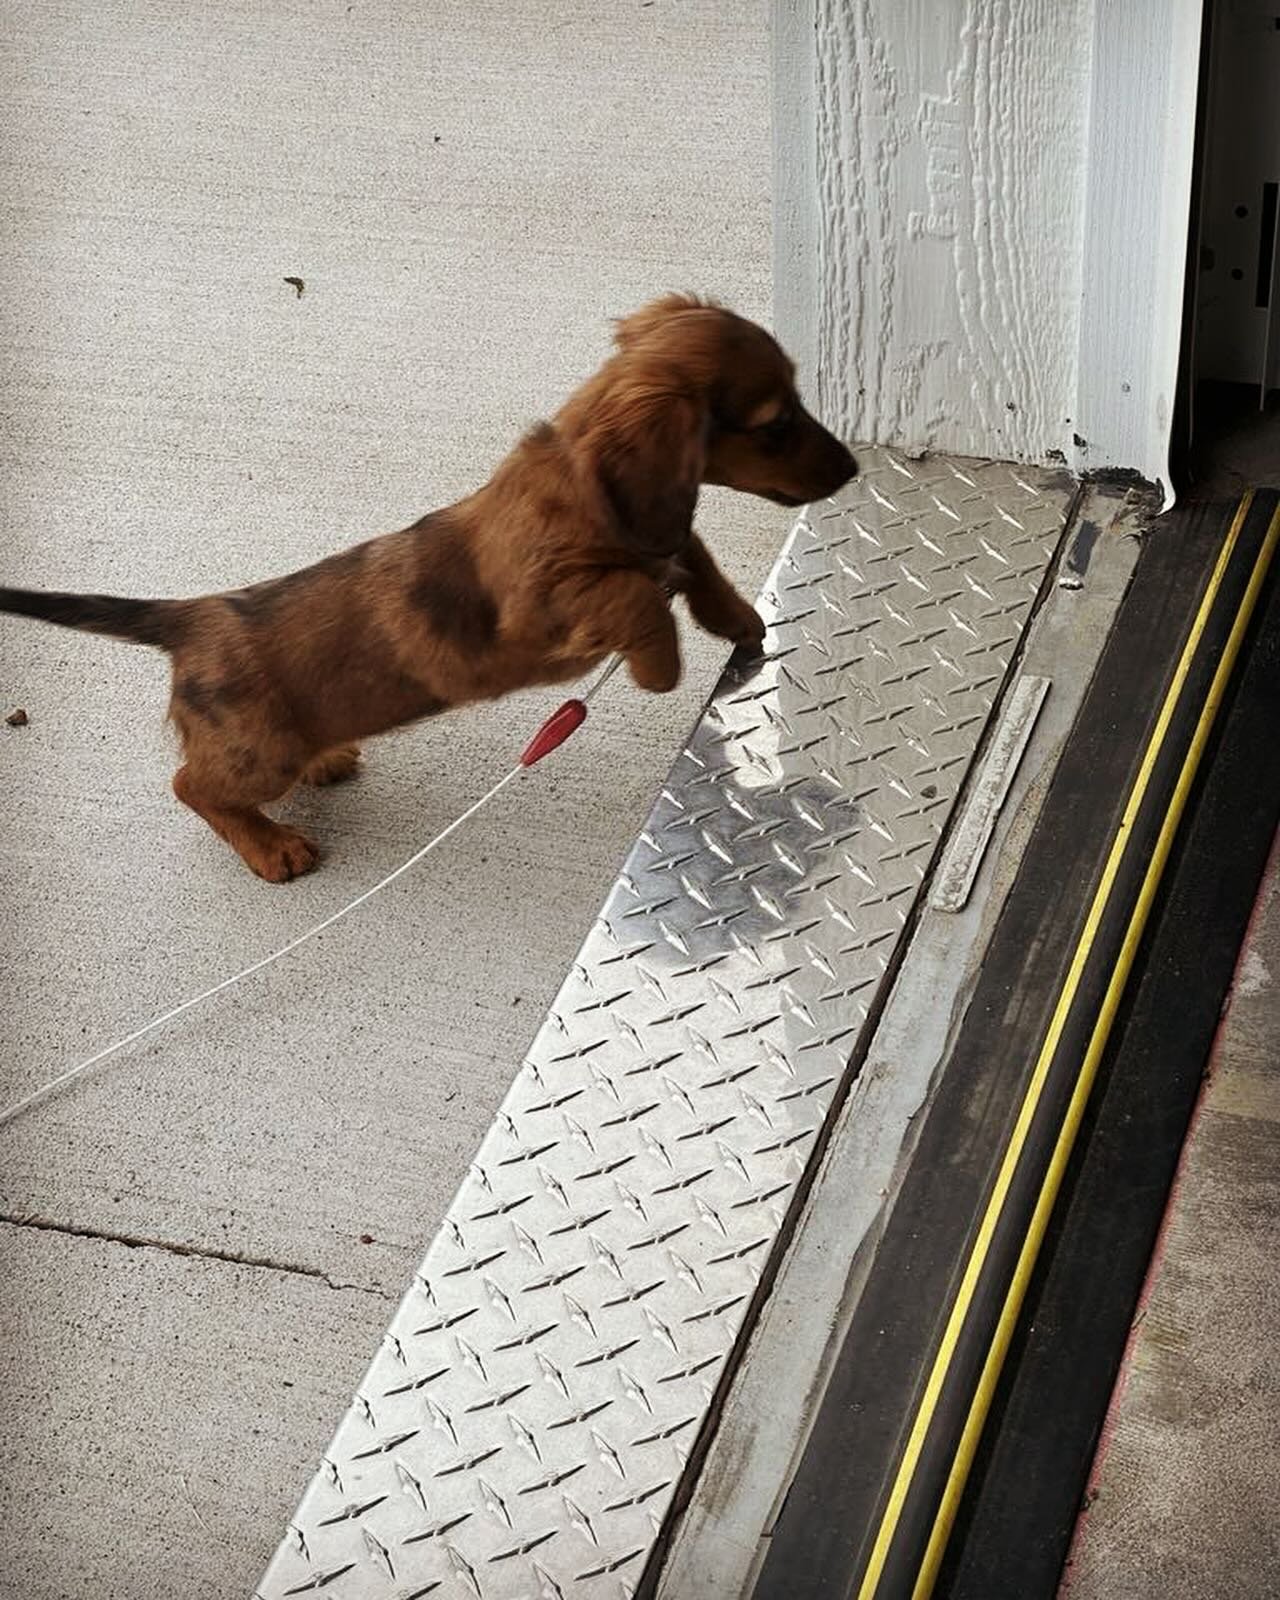 It can SEEM like a BIG STEP, 
setting foot into the gym that first time.
And for this little Mini Dachshund pup, it literally was!

Once inside you realize more and more with each passing workout, that it is really such a GREAT environment. So many g